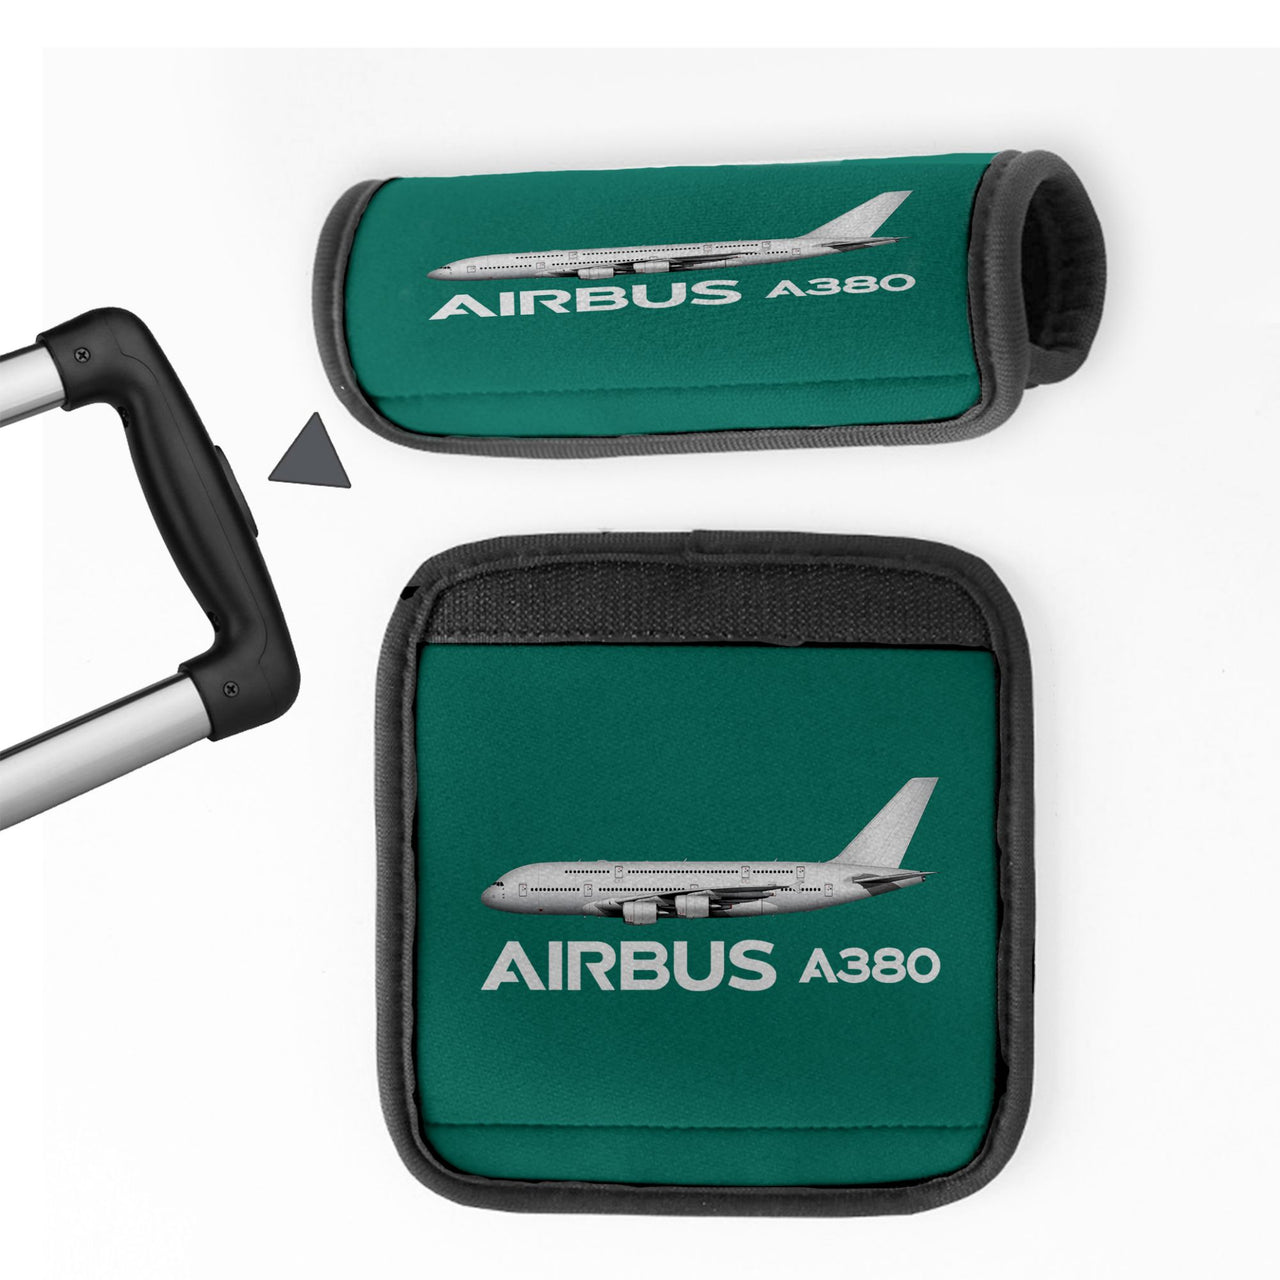 The Airbus A380 Designed Neoprene Luggage Handle Covers